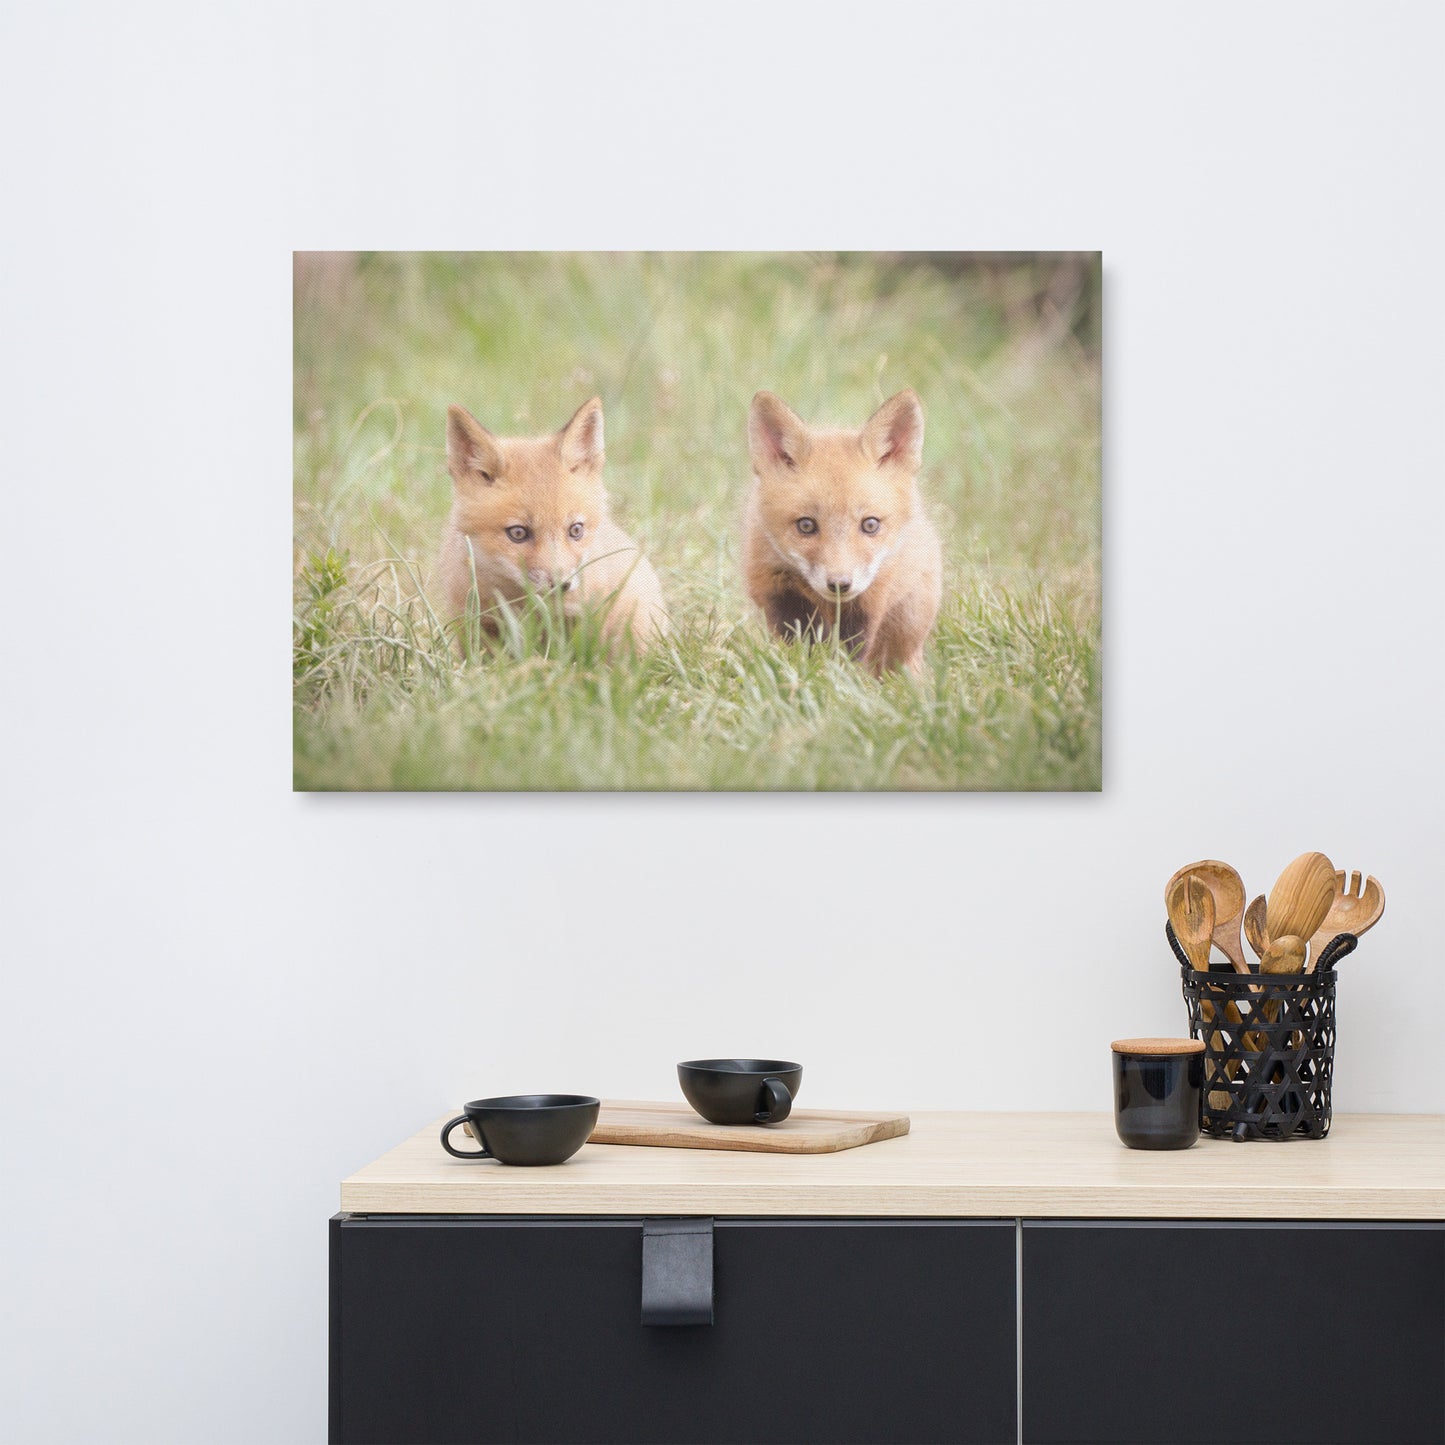 Baby Red Foxes Learning to Hunt Animal / Wildlife Photograph Canvas Wall Art Prints